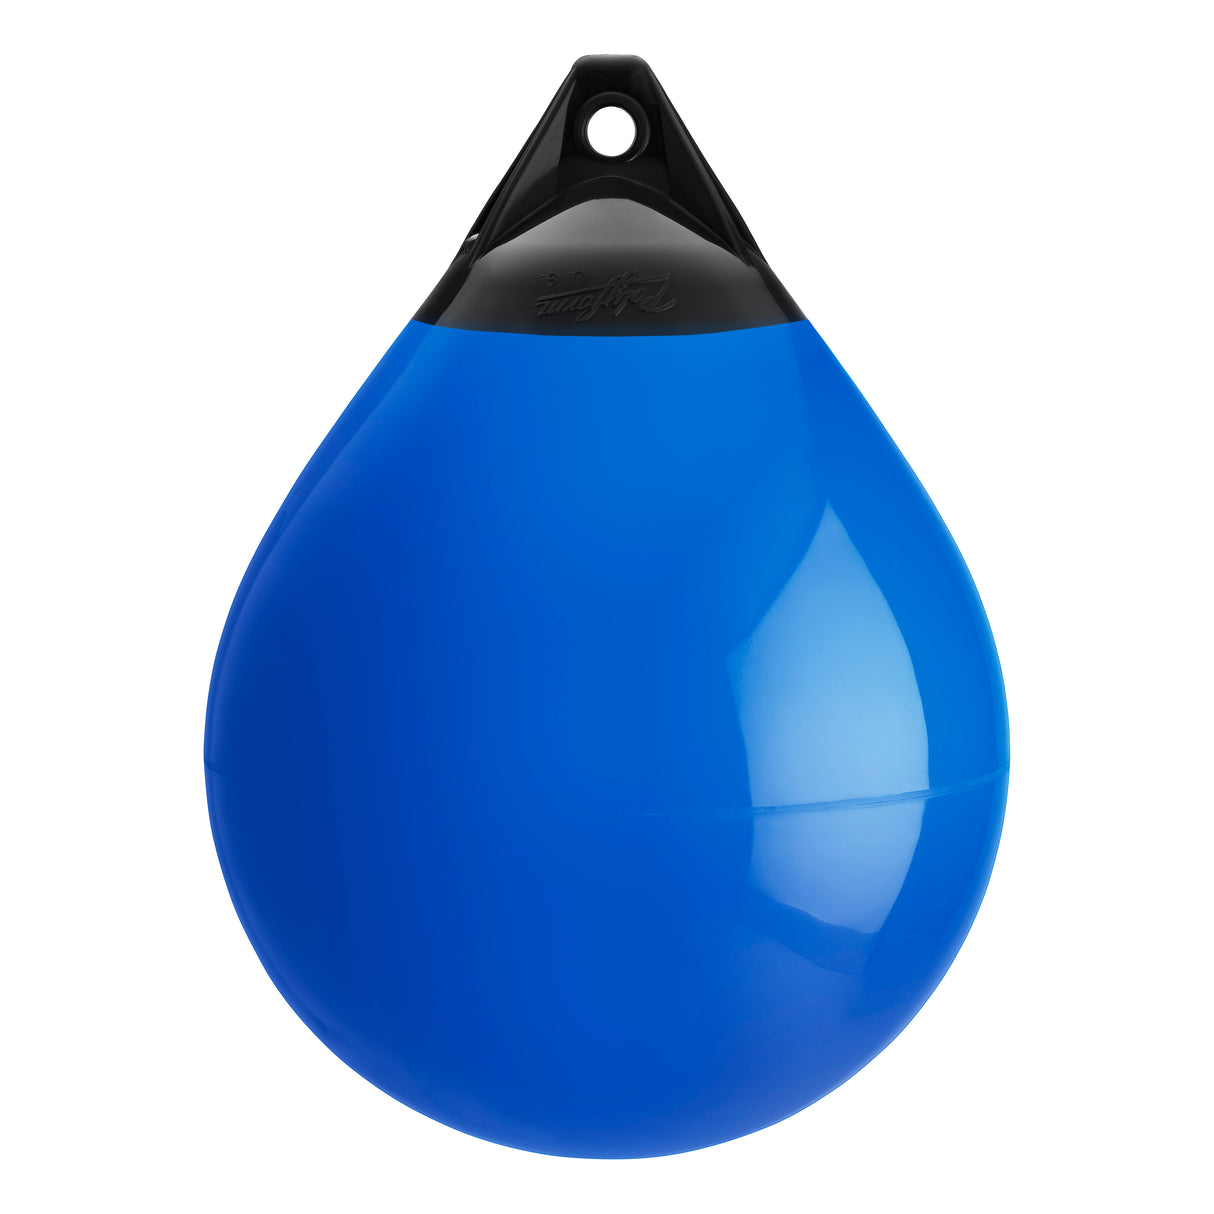 Blue buoy with Black-Top, Polyform A-4